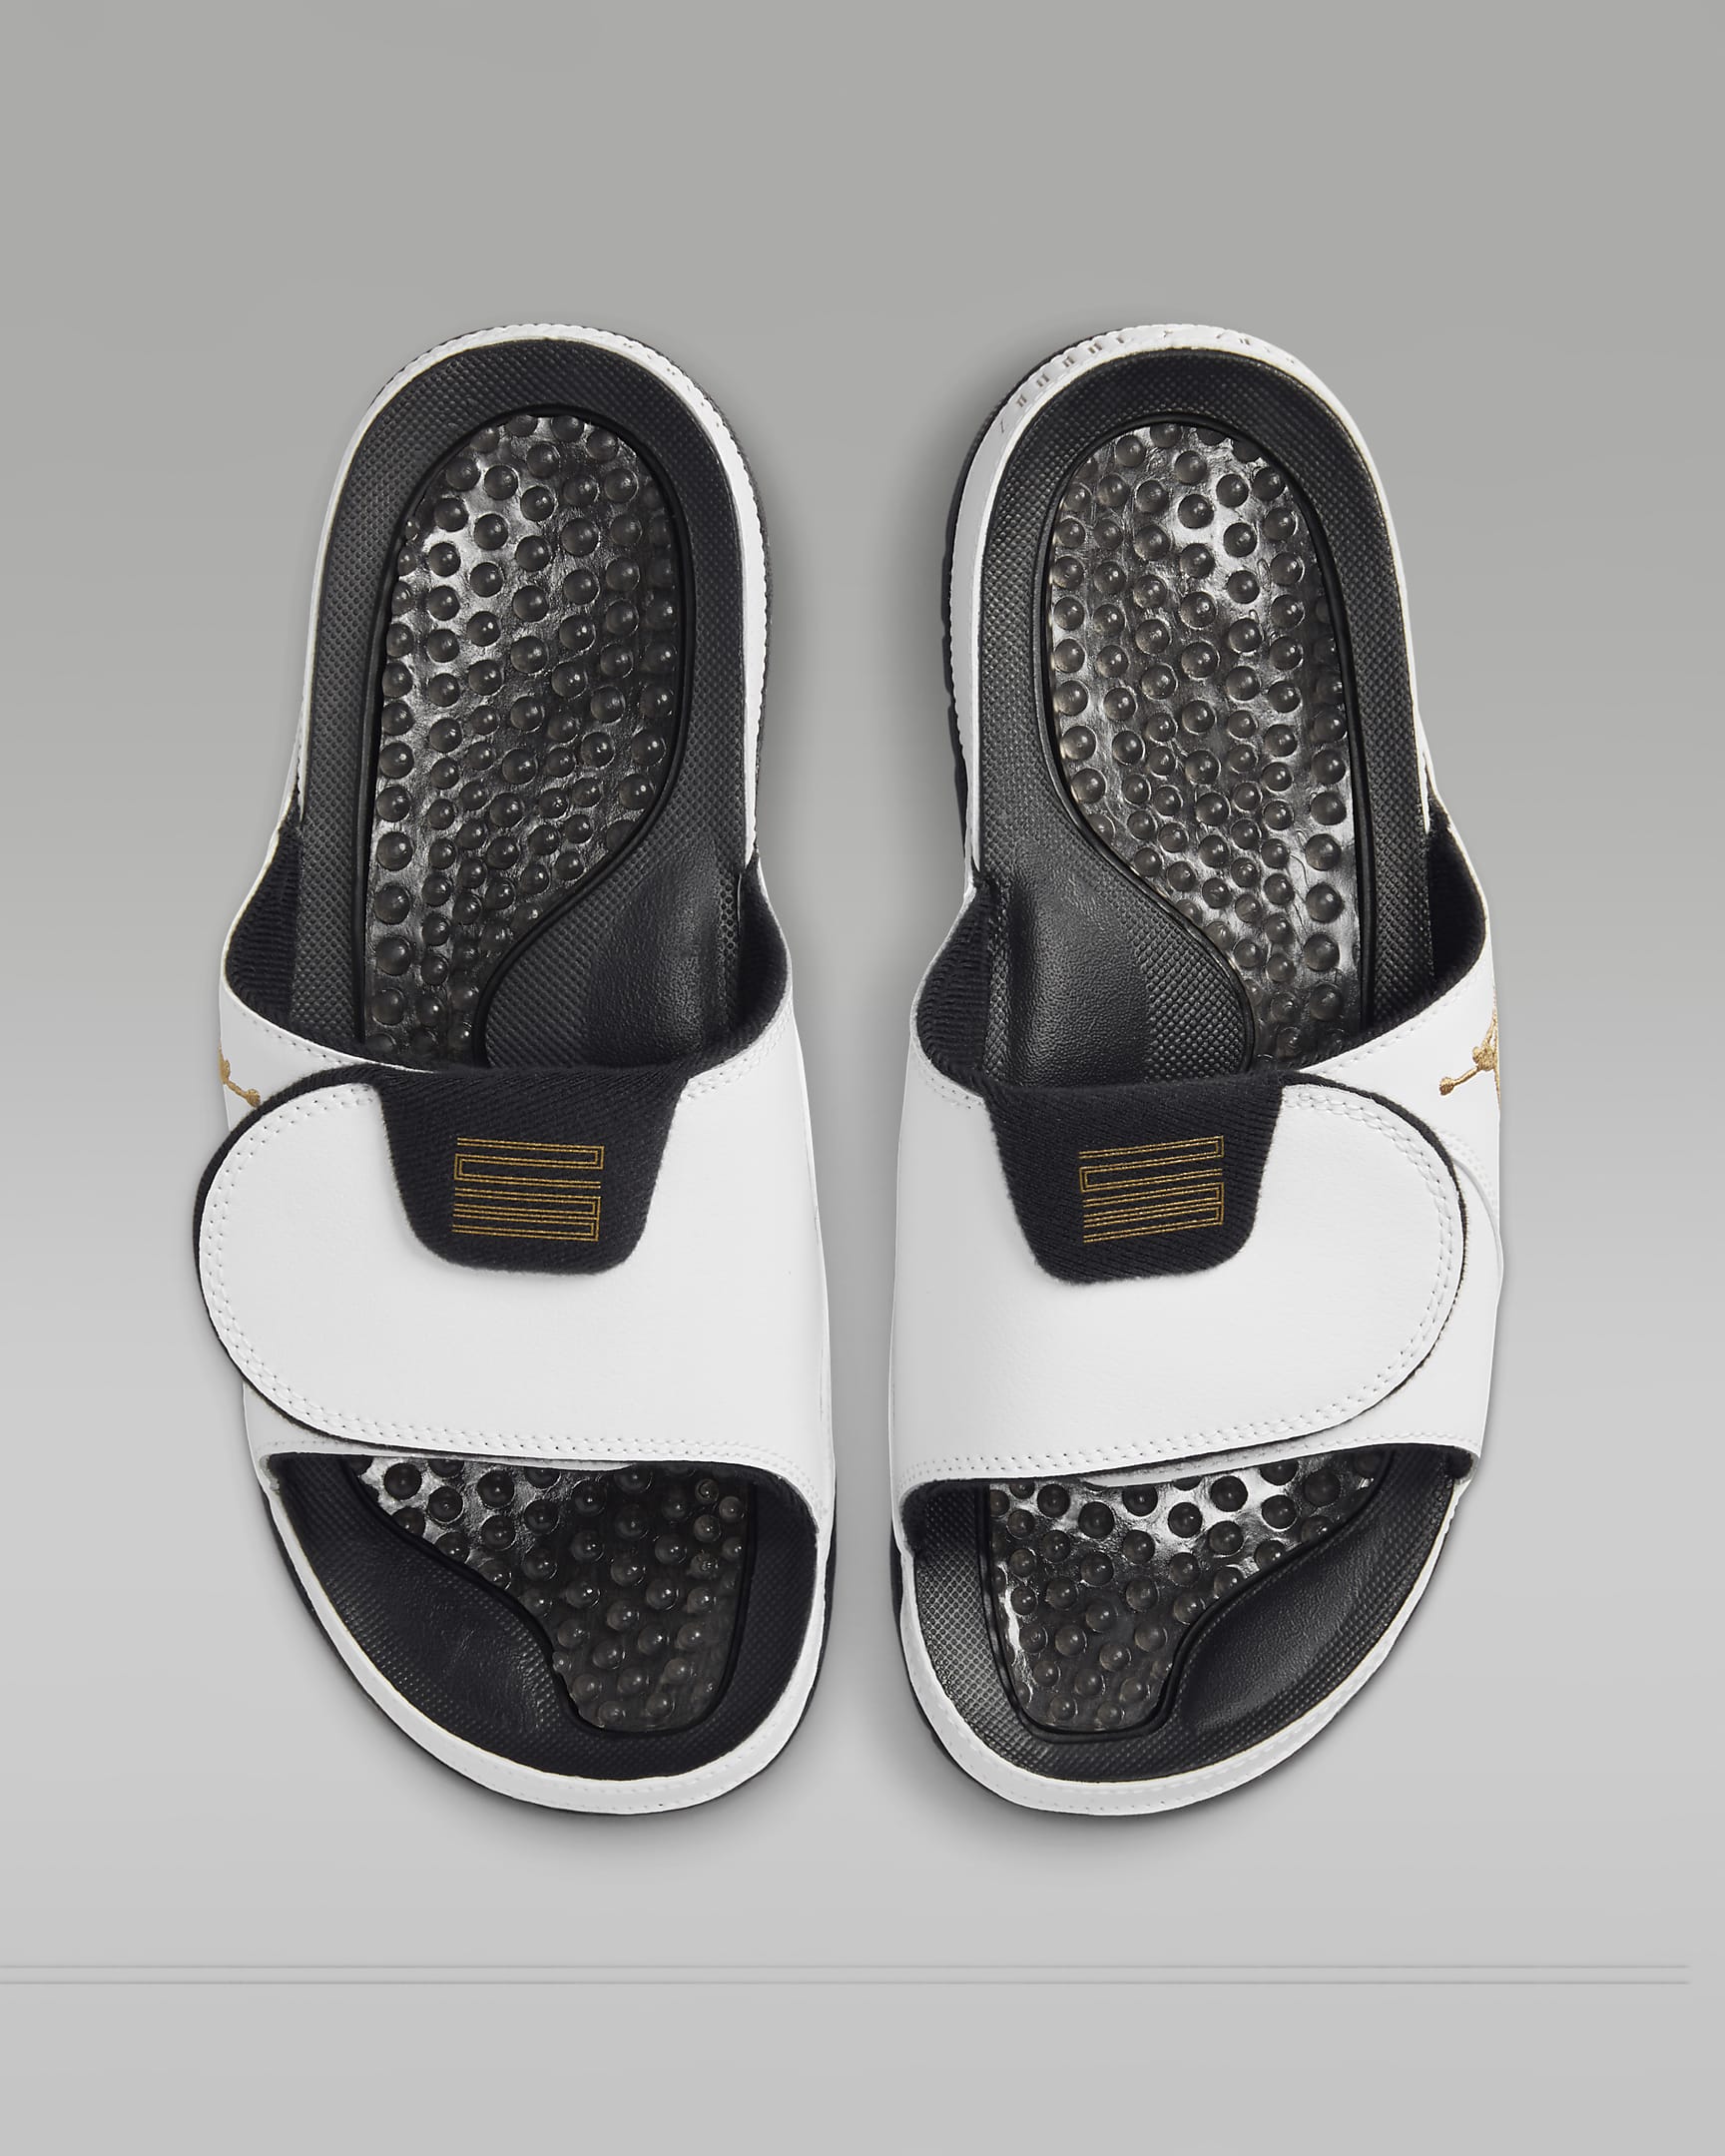 From Iconic Brand to Iconic Comfort: Jordan Hydro XI Men’s Slides Review